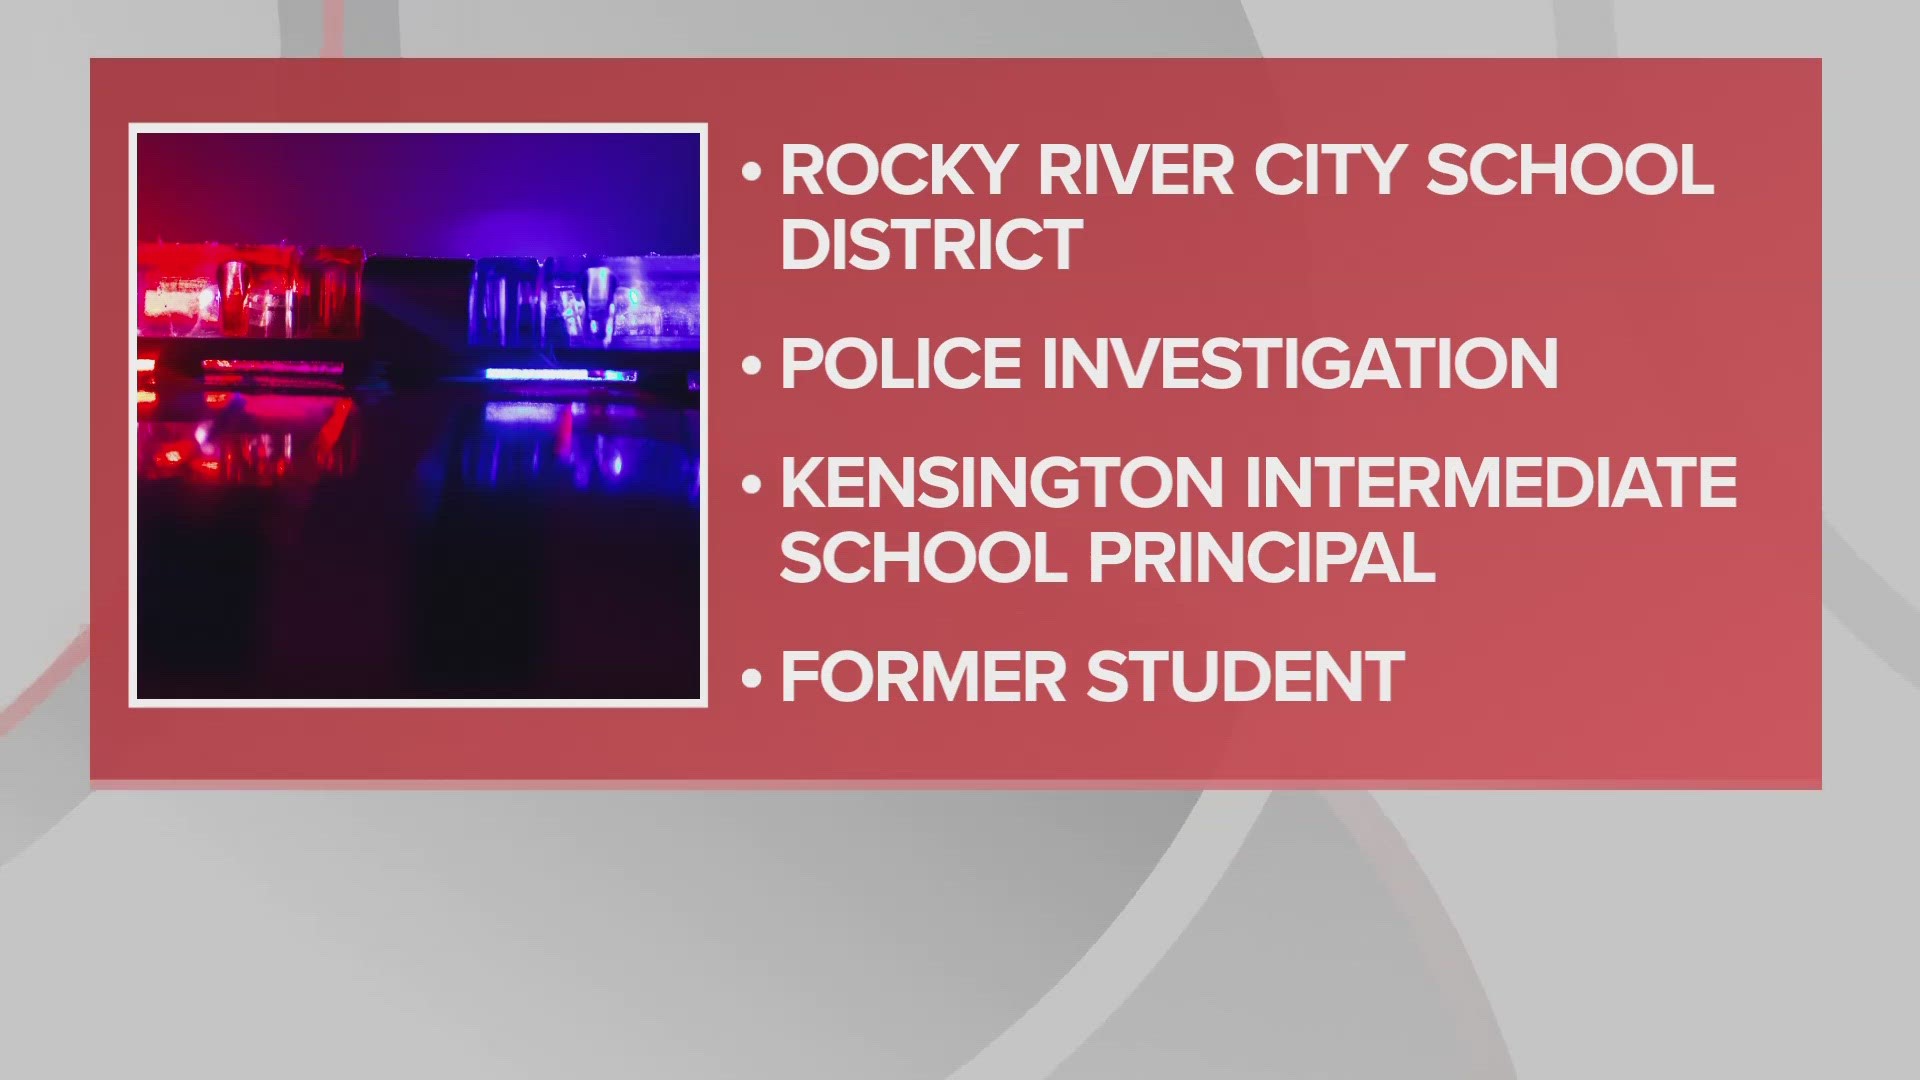 Officials say the matter involves an unspecified complaint against Dr. Heath Horton brought by the parent of a former Rocky River High School student.